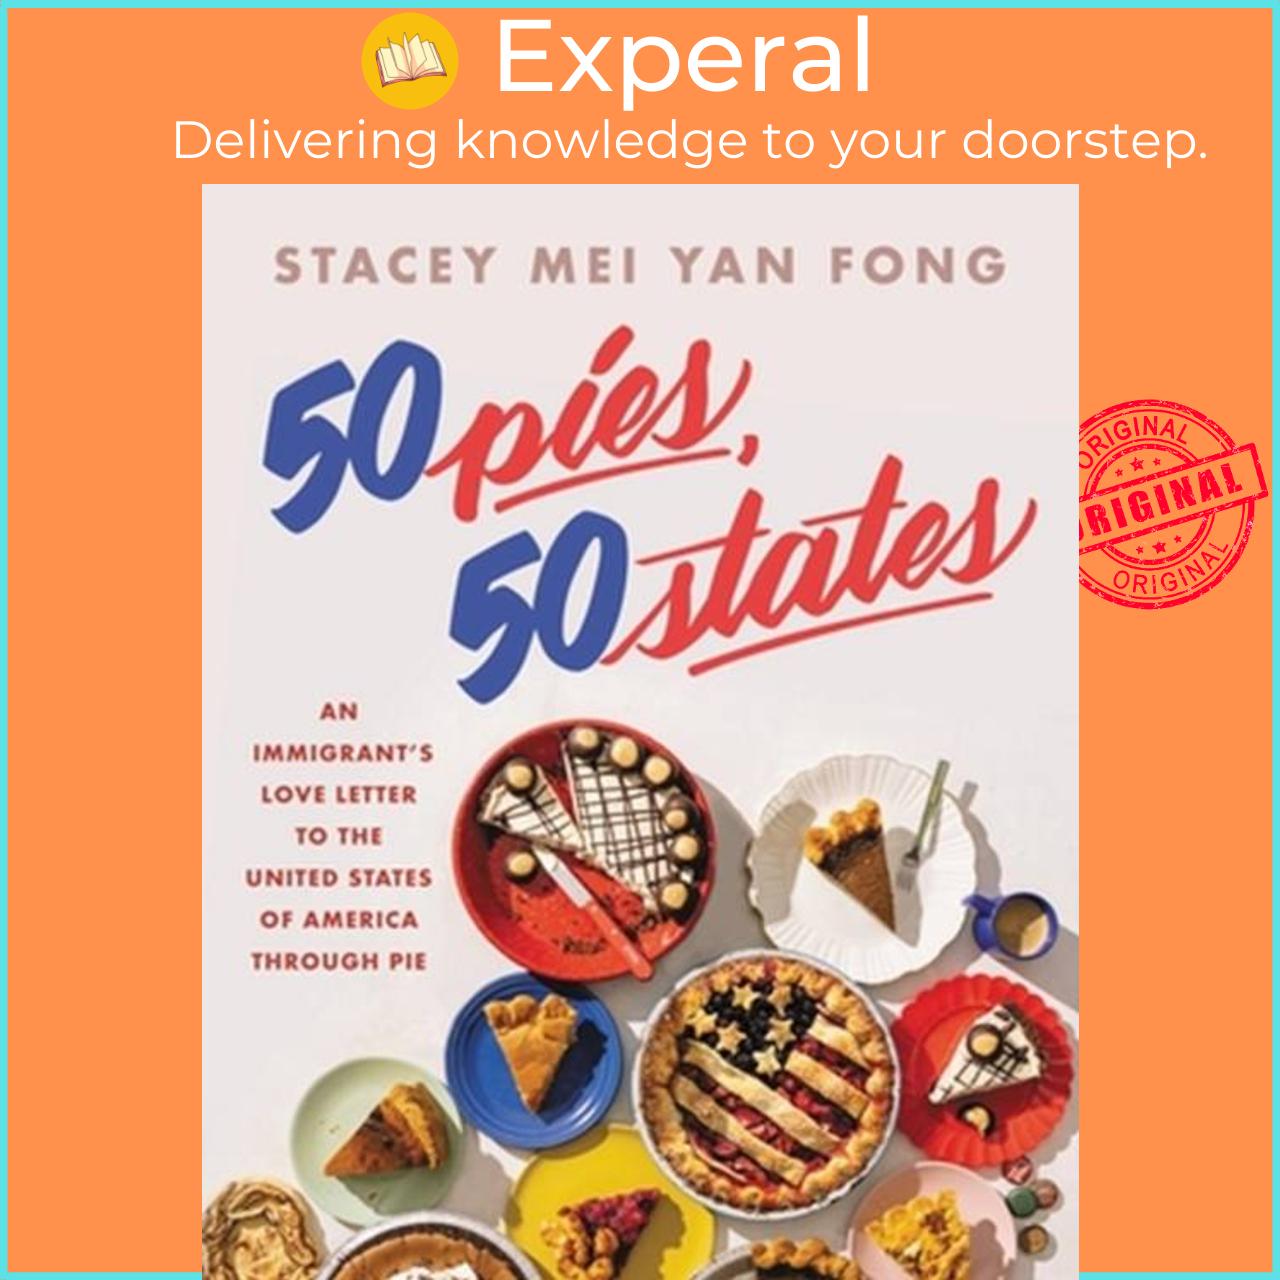 Sách - 50 Pies, 50 States - An Immigrant's Love Letter to the United Stat by Stacey Mei Yan Fong (UK edition, hardcover)